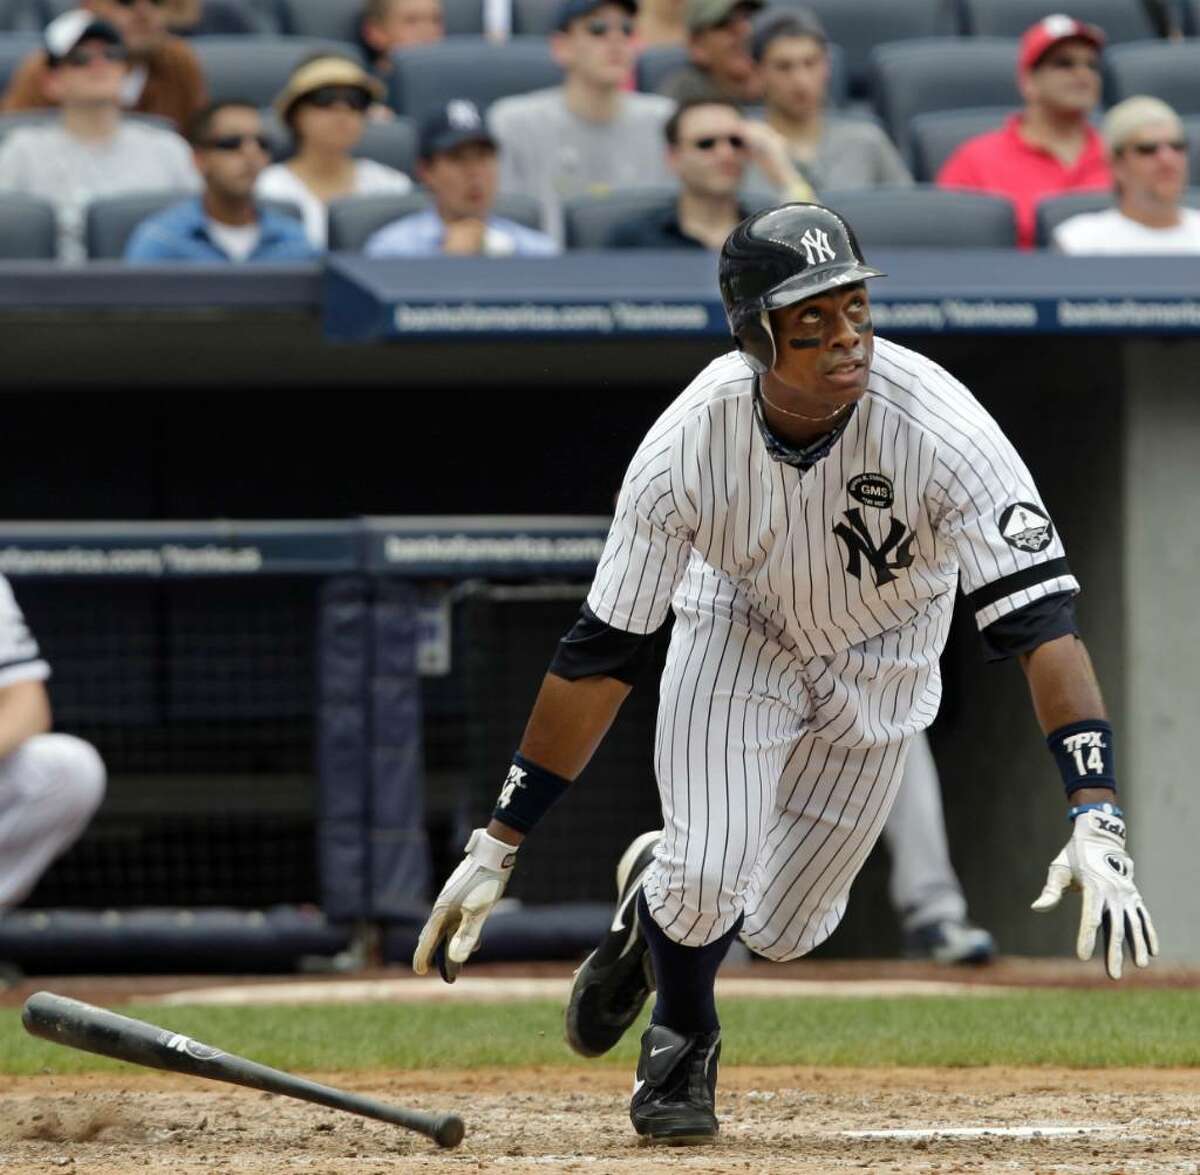 New York Yankees' Curtis Granderson watches his fourth-inning solo home run off Kansas City Royals starting pitcher Sean O' Sullivan in a baseball game at Yankee Stadium on Sunday, July 25, 2010, in New York. (AP Photo/Kathy Willens)